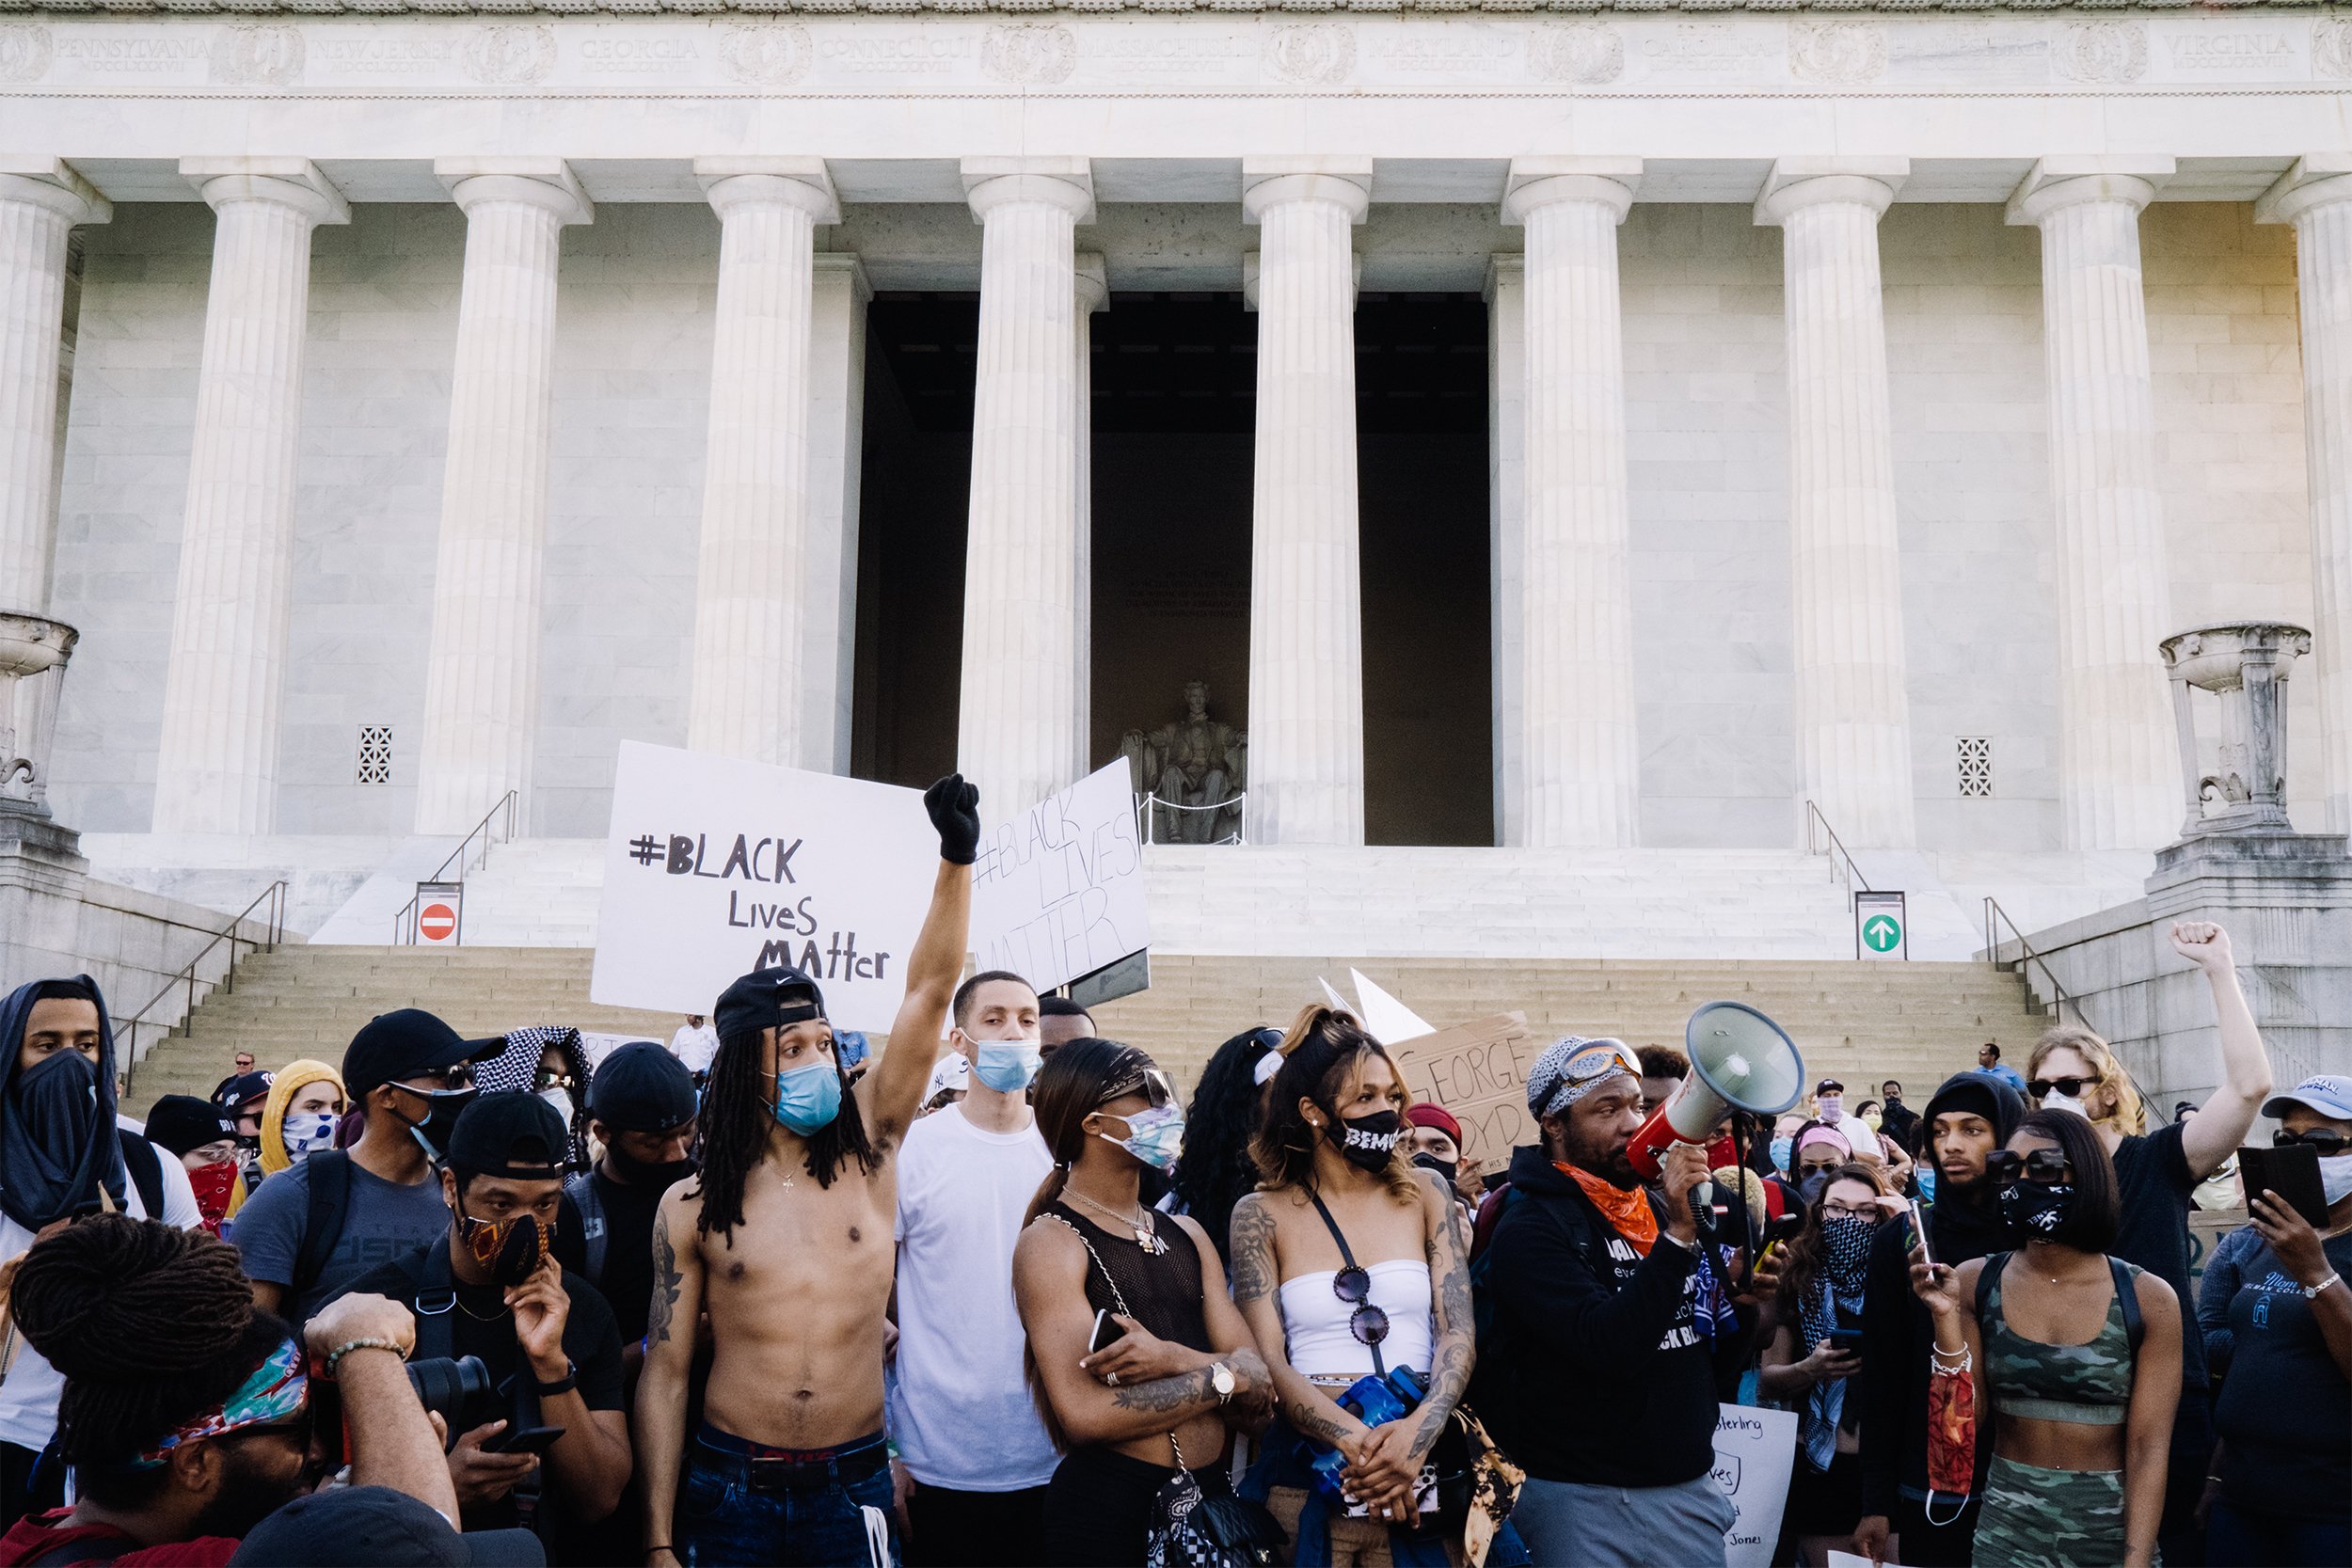  Demonstrators congregate at the Lincoln Memorial after marching from the National Museum of African American History and Culture in protest during the aftermath of George Floyd Jr.’s death, in Washington D.C. on May 30, 2020. Floyd’s death five days